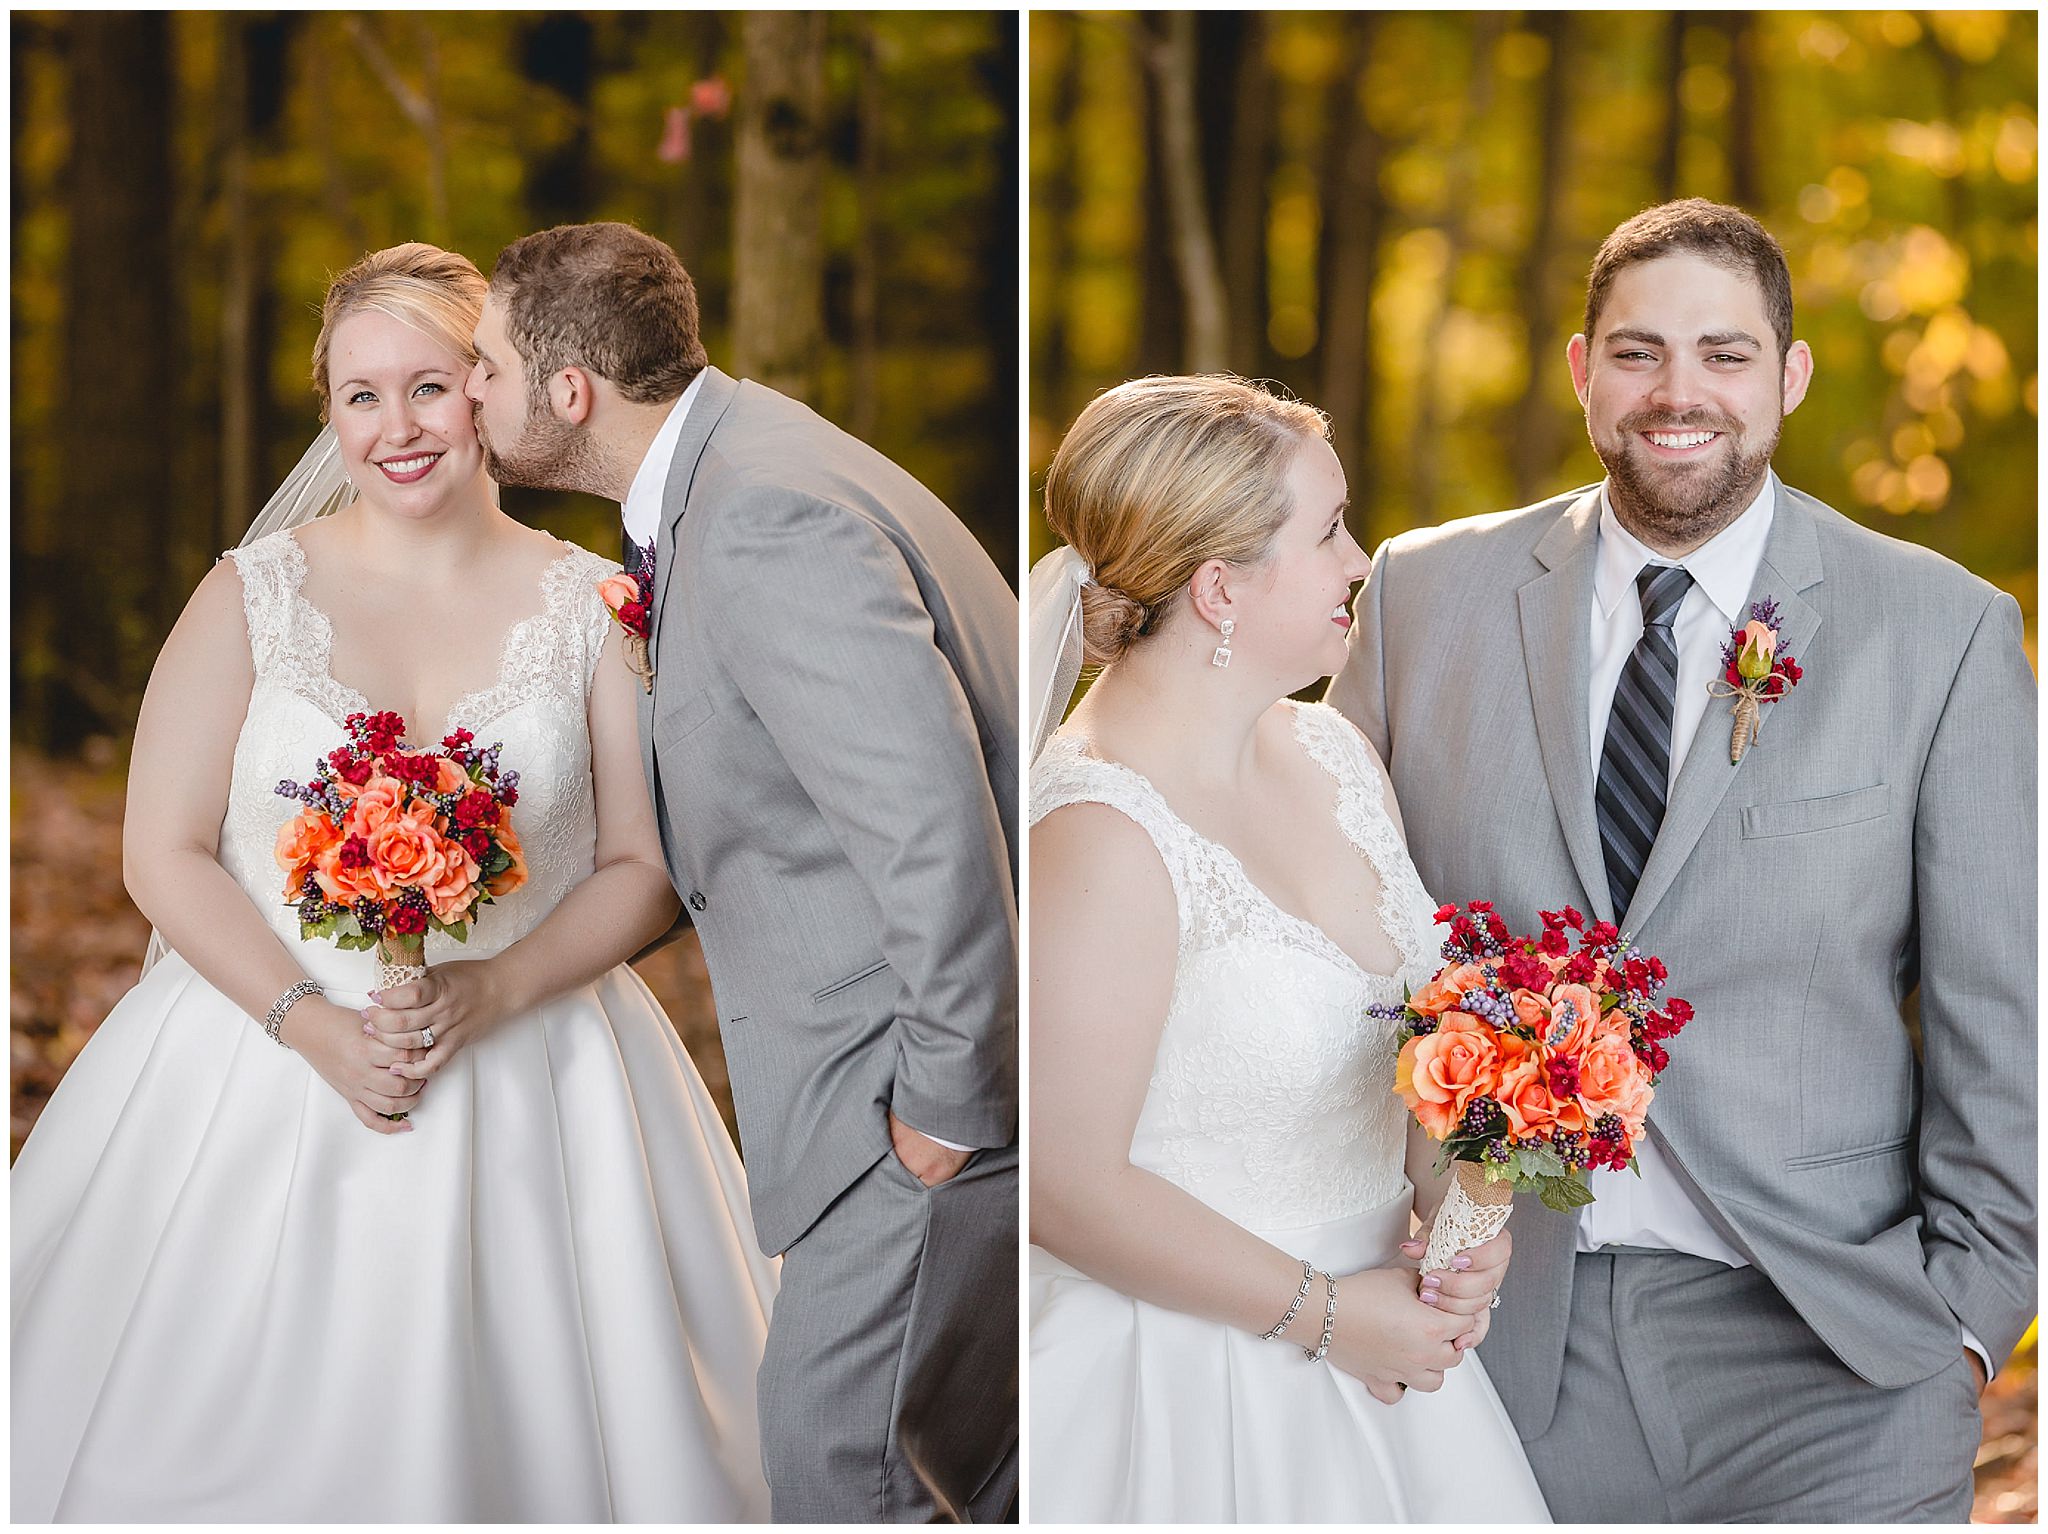 Bride and groom portraits at the Barn at Soergel Hollow